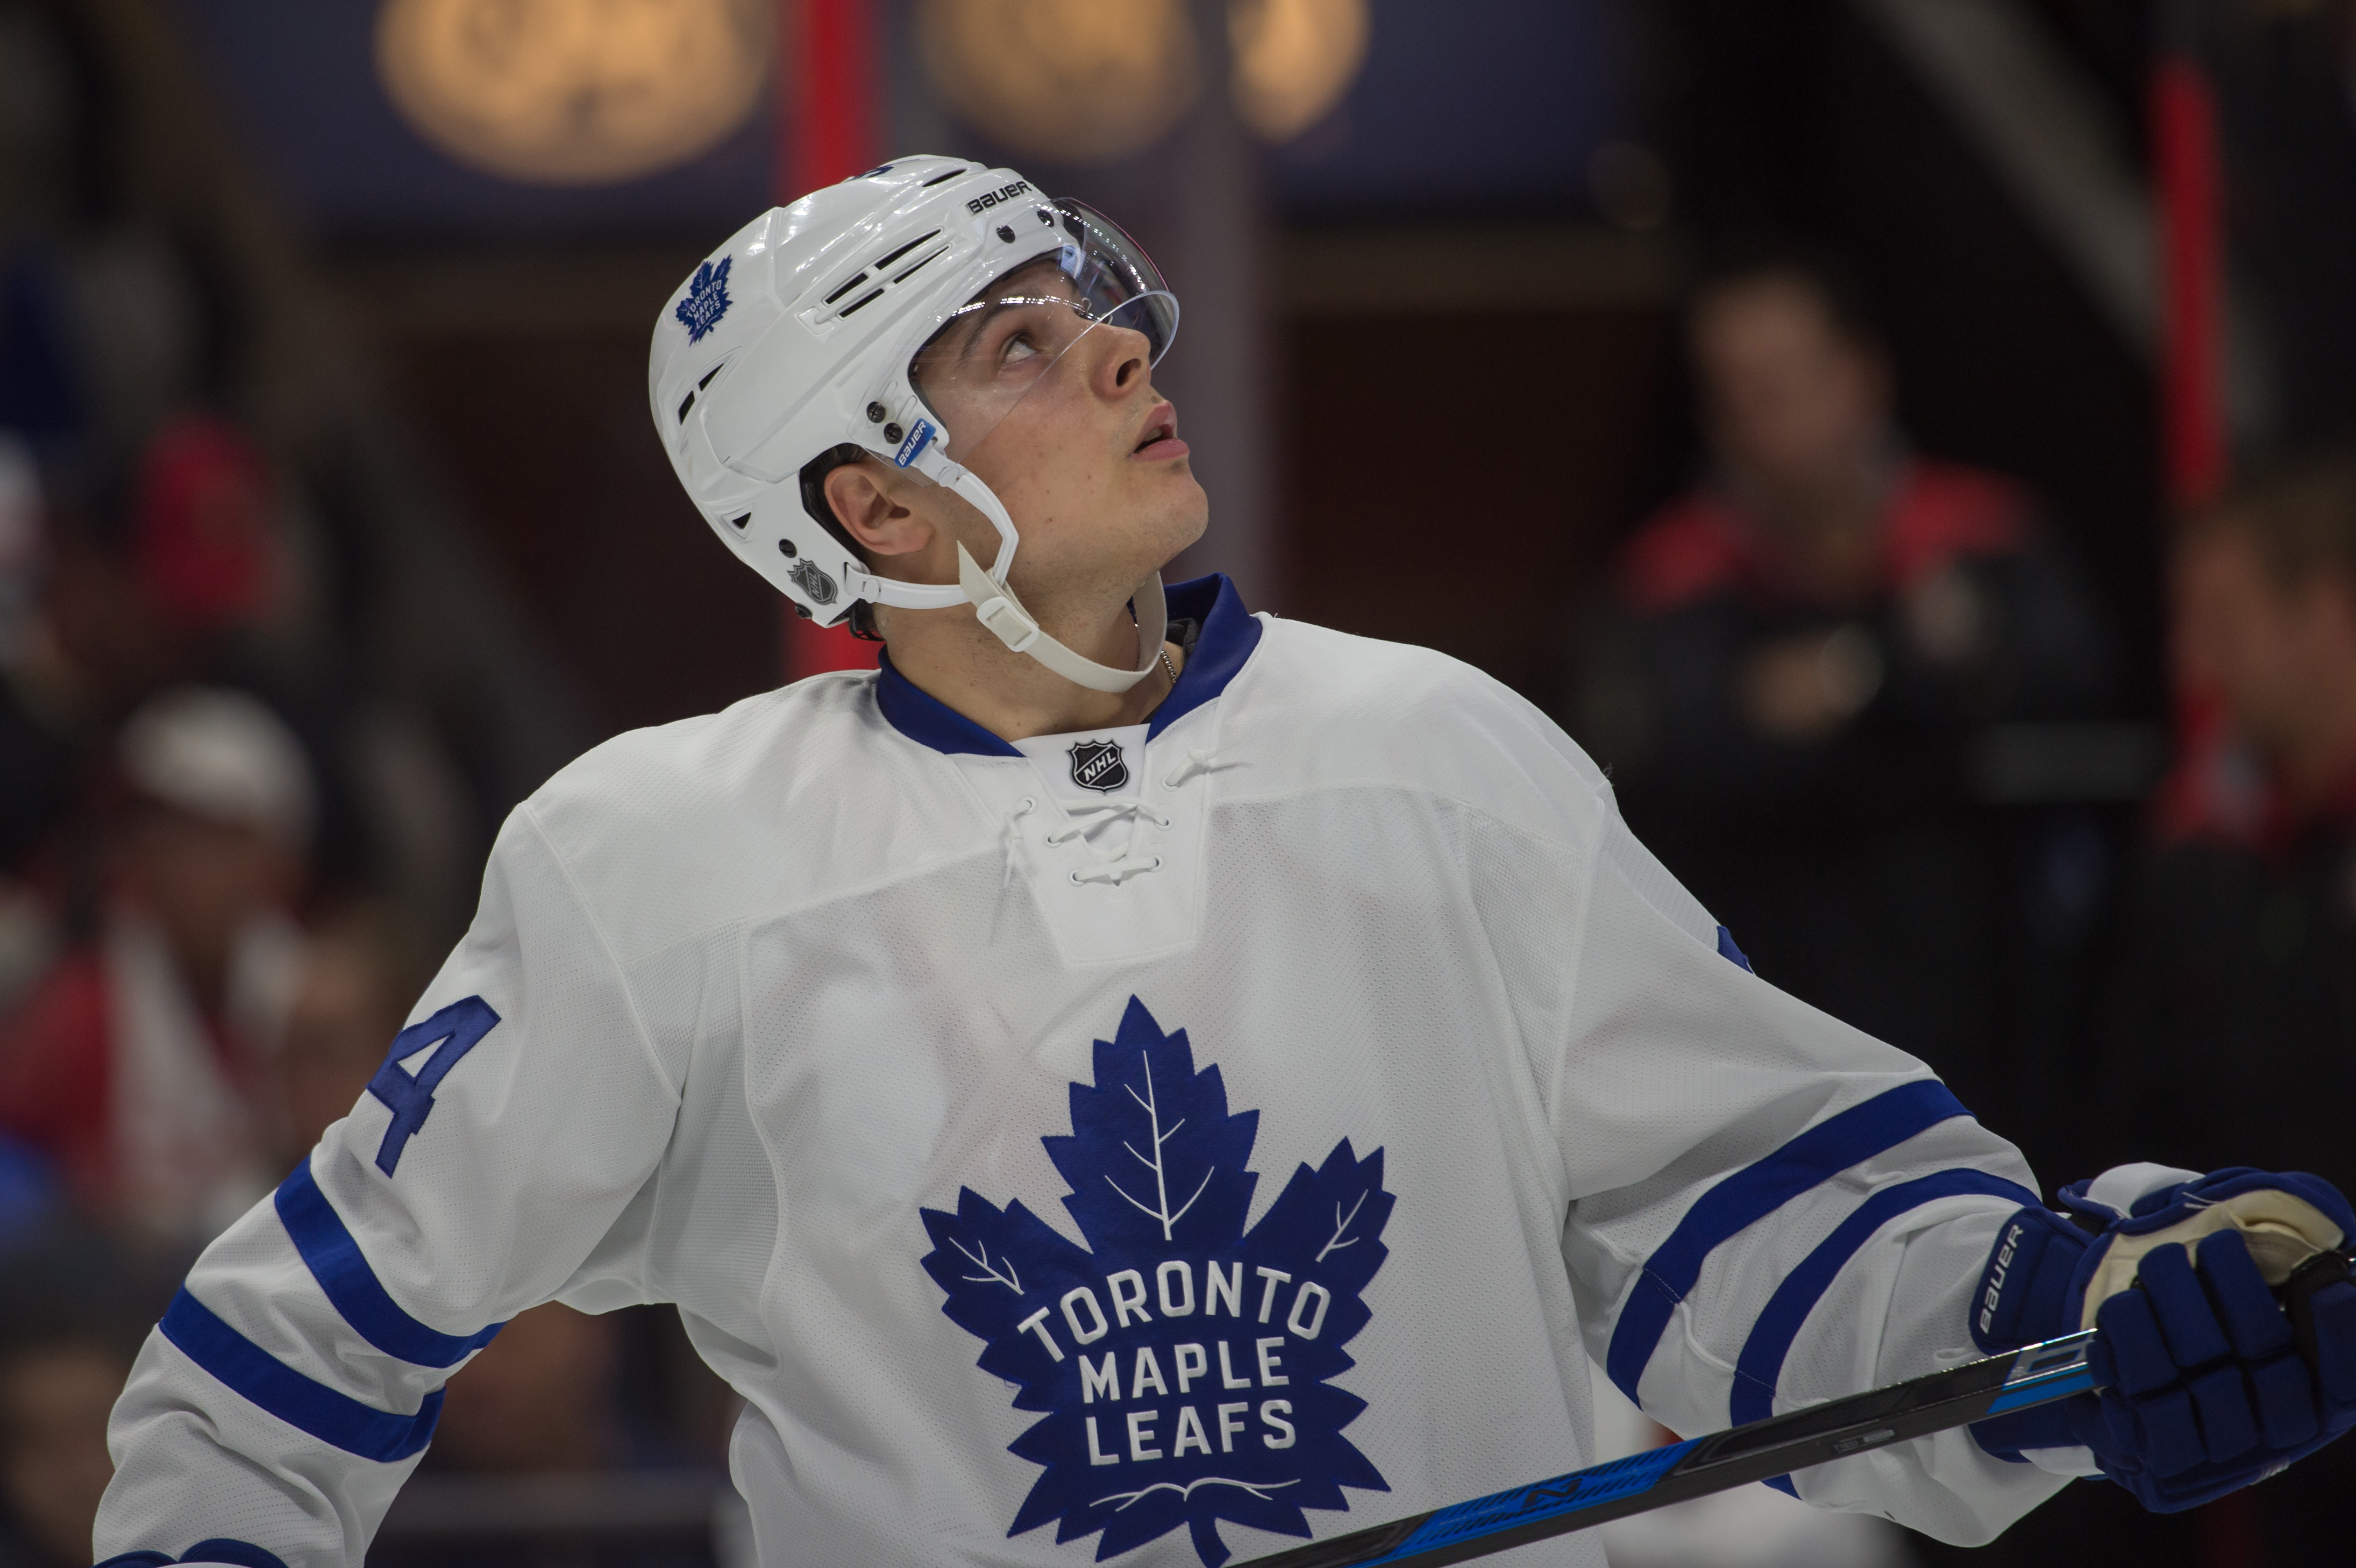 Toronto Maple Leafs: Why Mats Sundin's praise for Auston Matthews is  significant